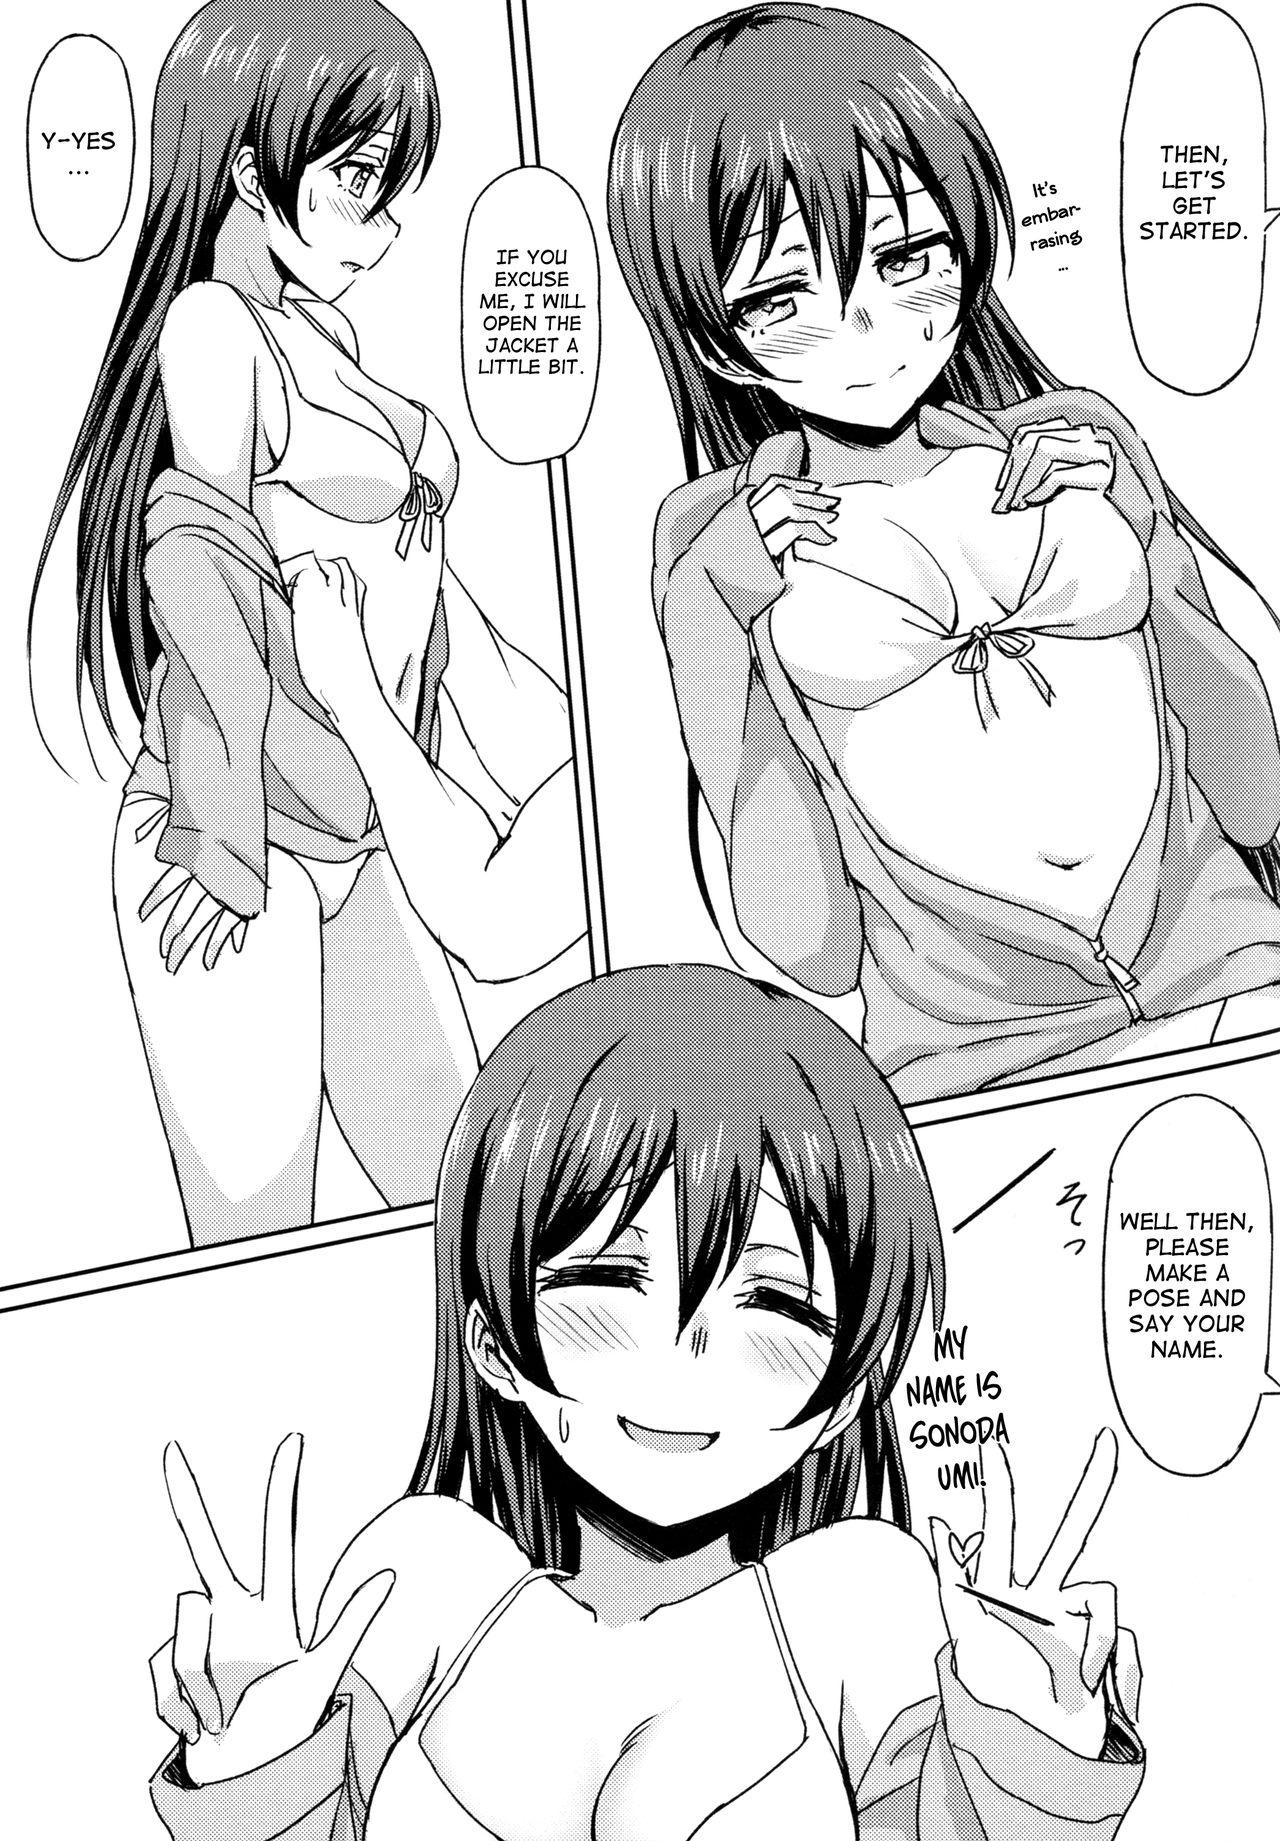 Best Blowjobs Hah,Wrench This! - Love live Lick - Page 7